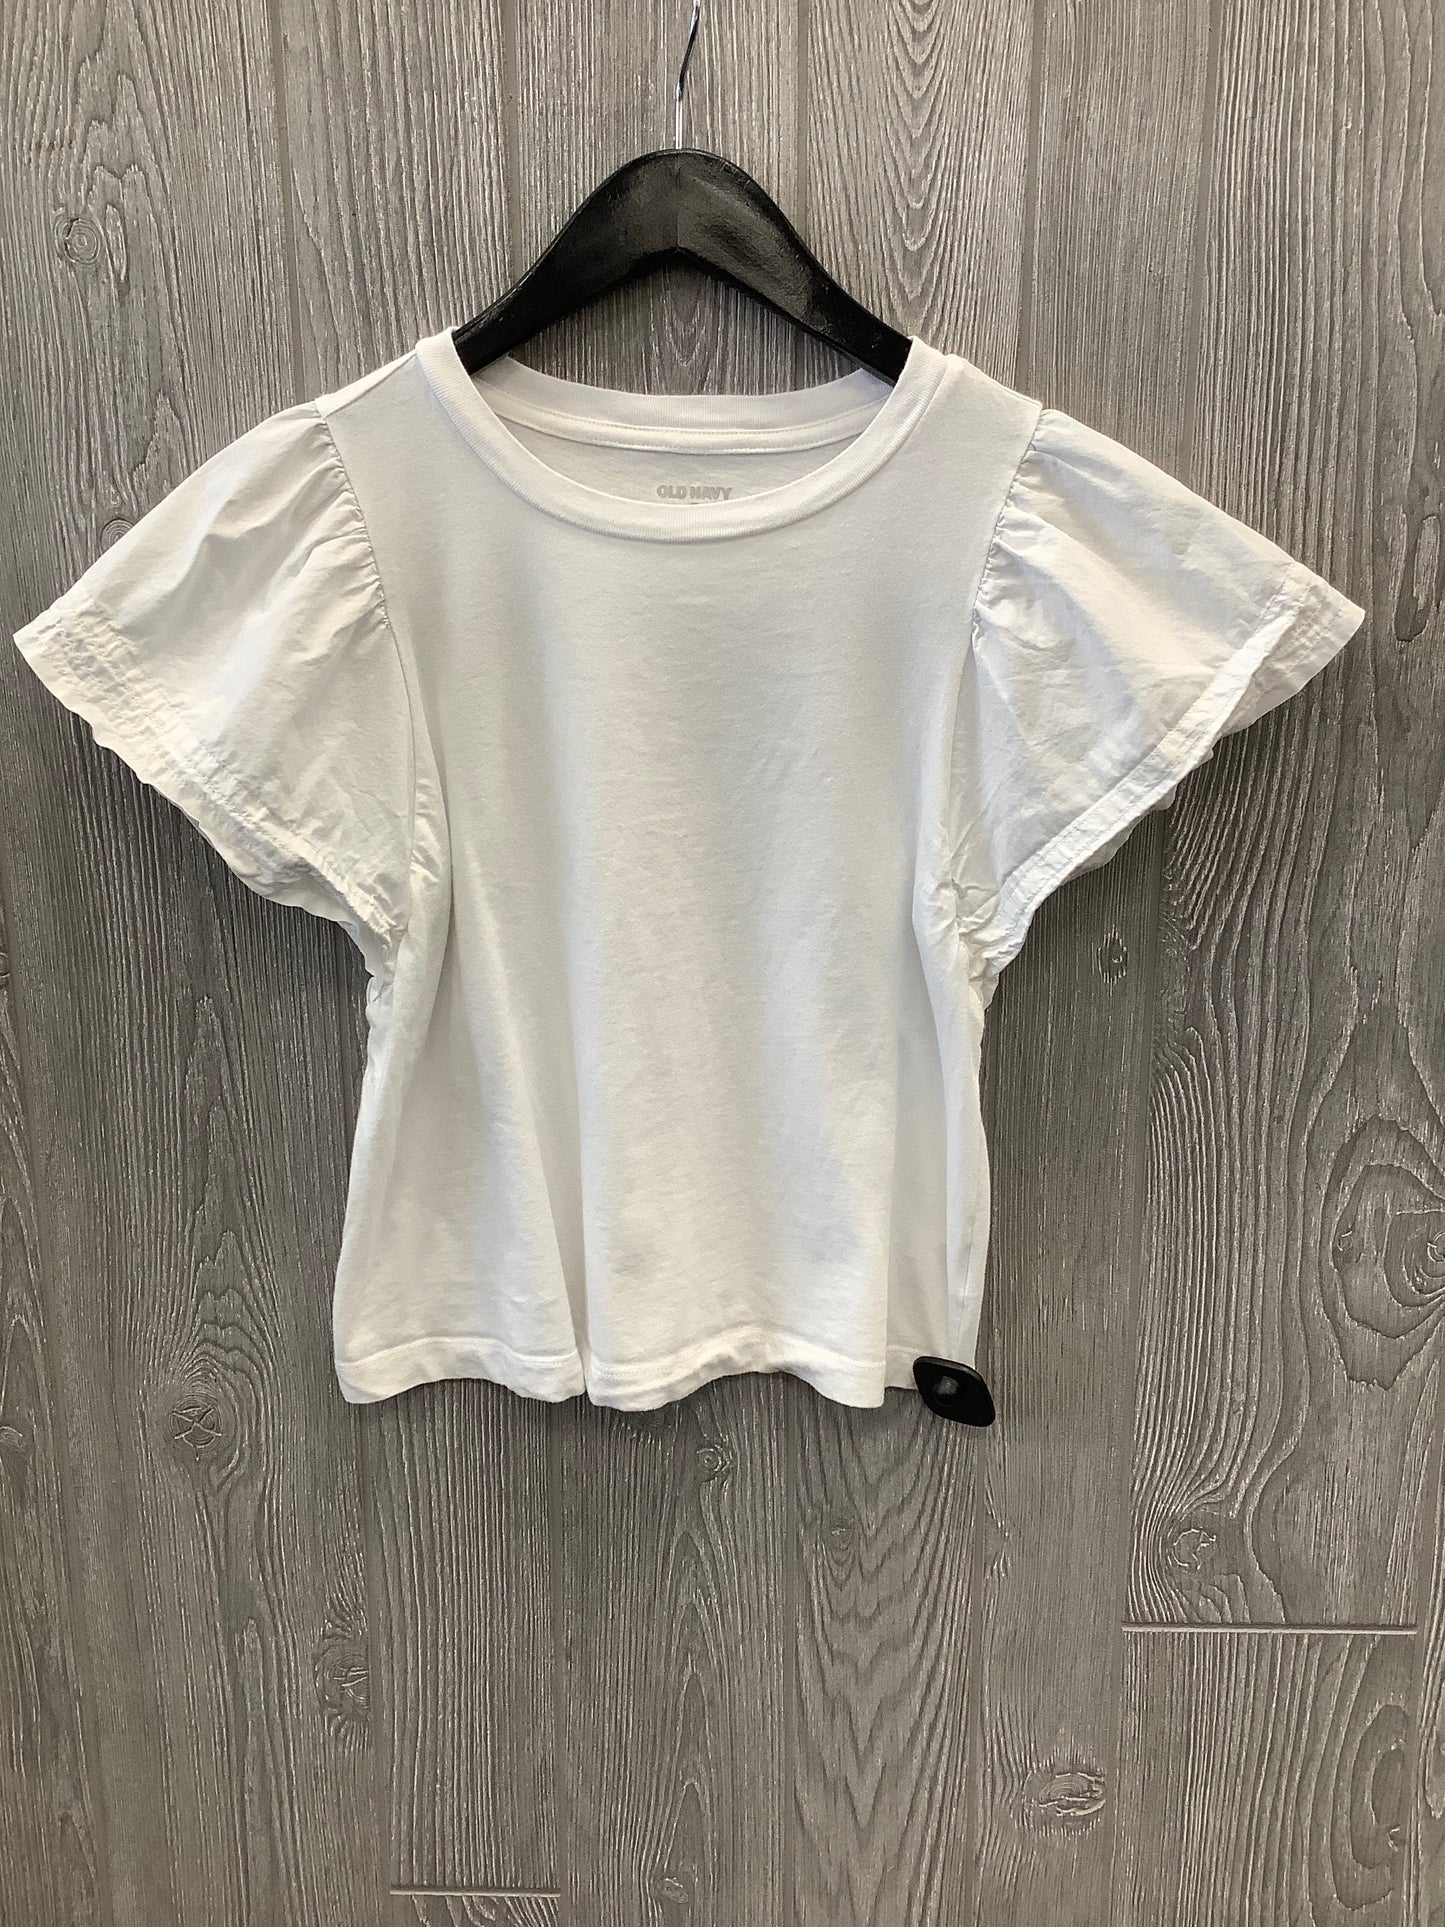 White Top Short Sleeve Old Navy, Size Xs